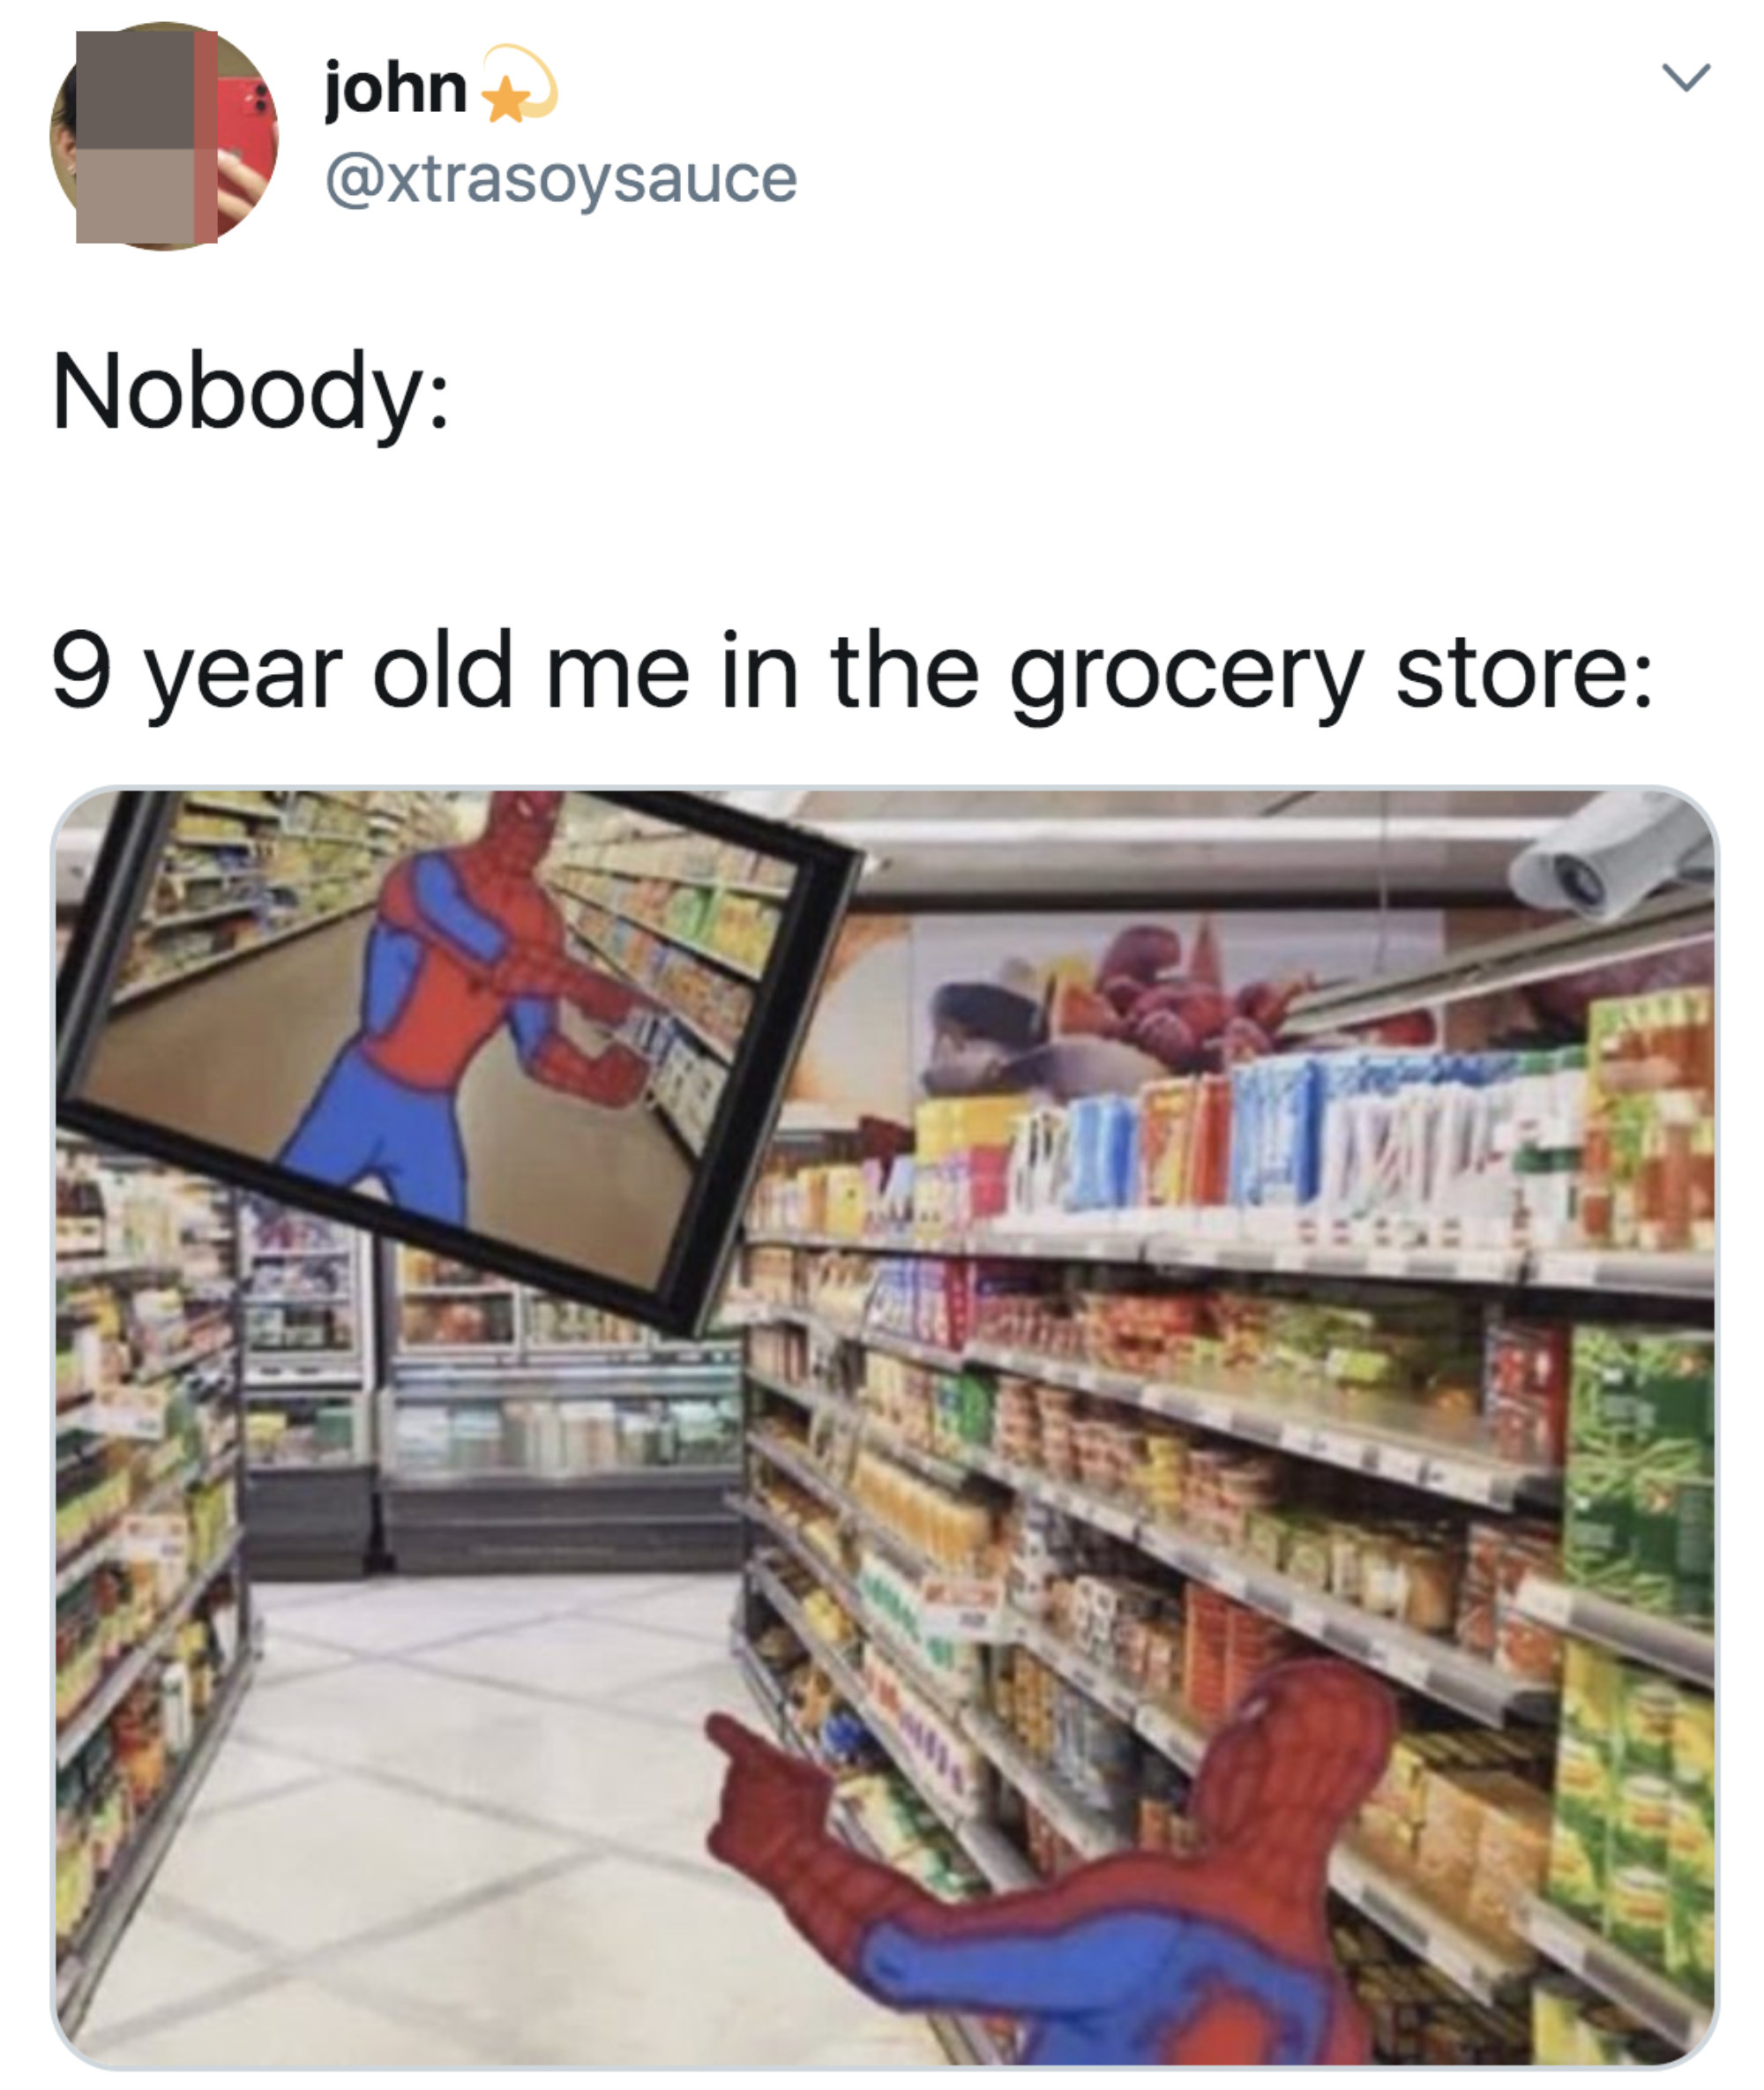 Picture of Spiderman pointing at himself on the CCTV at the grocery store